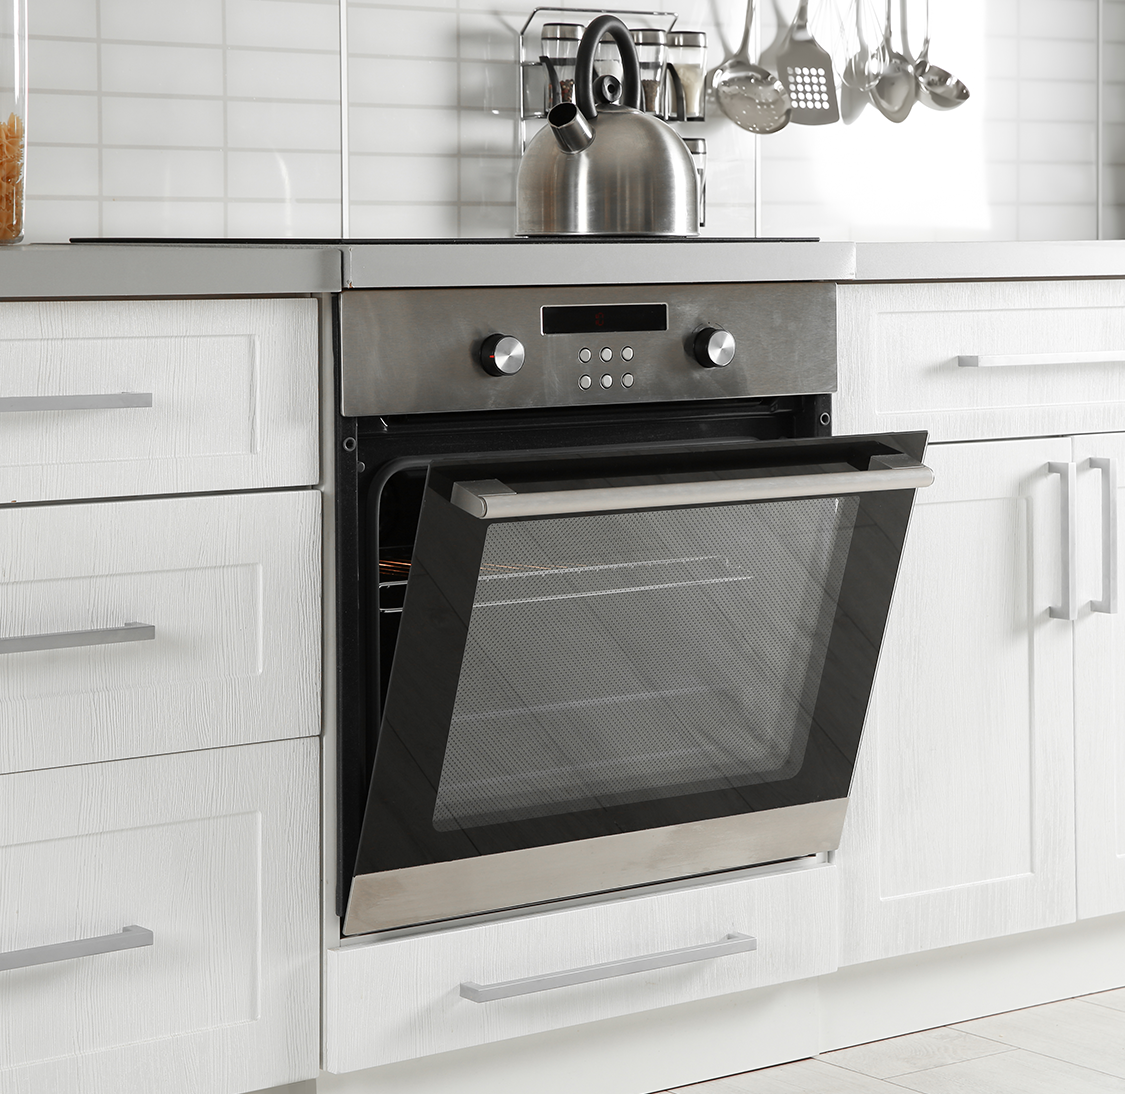 Appliance servicing and repair in Lancashire